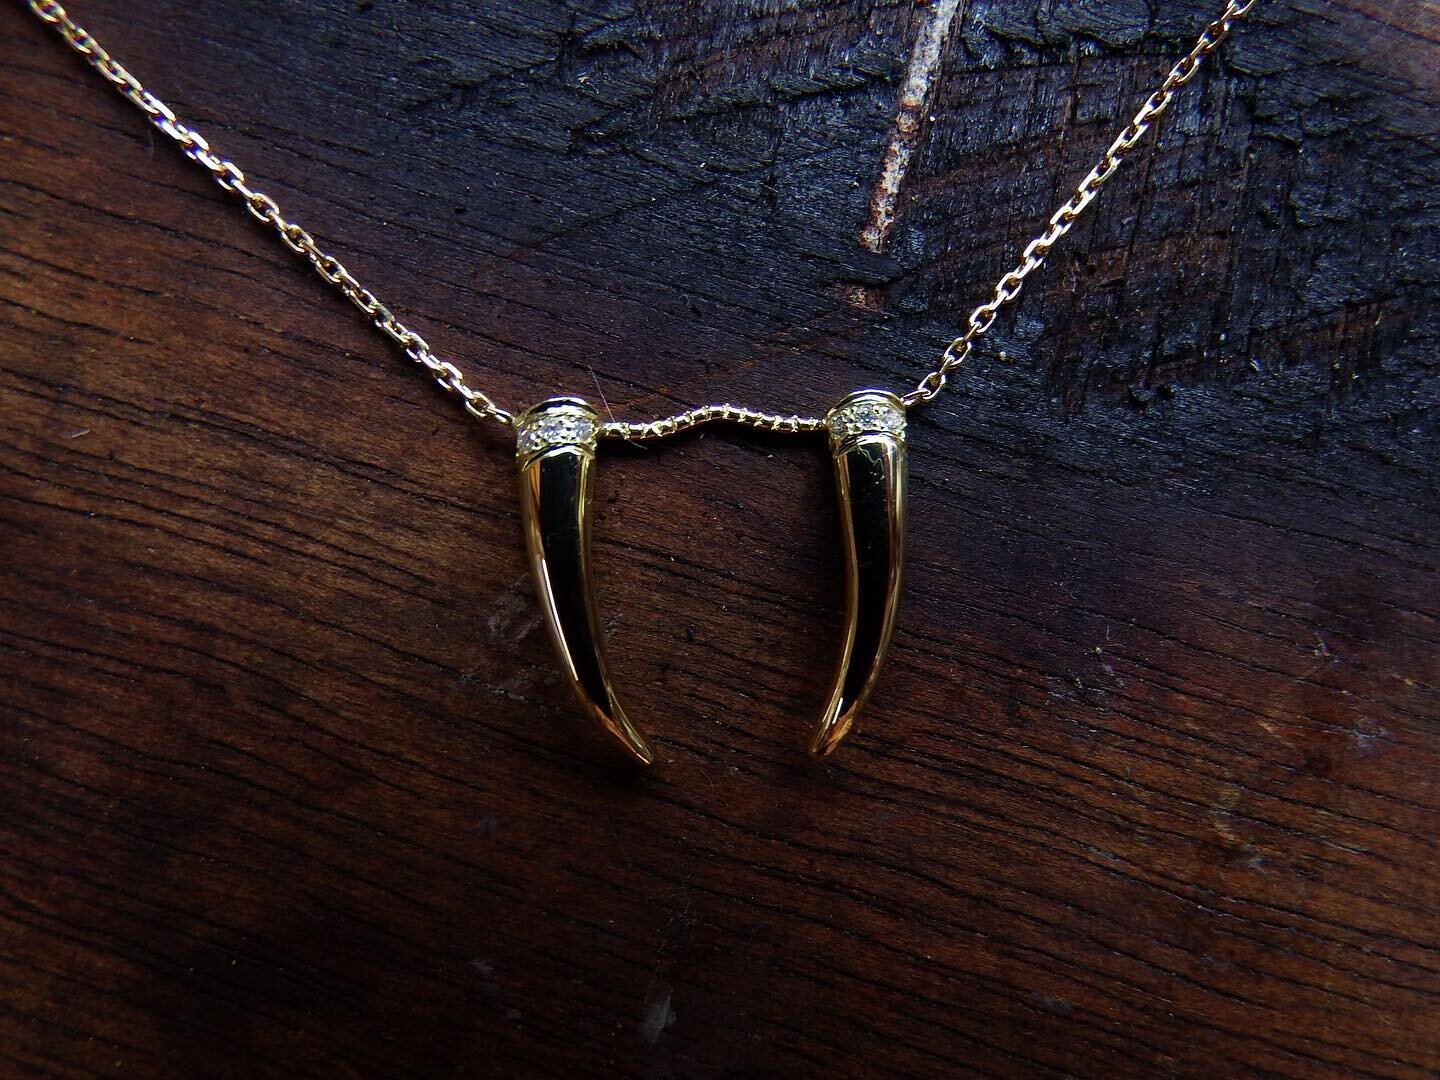 Cobra Fangs 🐍 handmade in 18ct yellow gold and studded with diamonds 💎 
Link in bio.

#jewellery #snake #snakejewellery #cobra #handmade #handmadejewellery #goldsmith #18ct #gold #goldnecklace #newcklace #snakenecklace